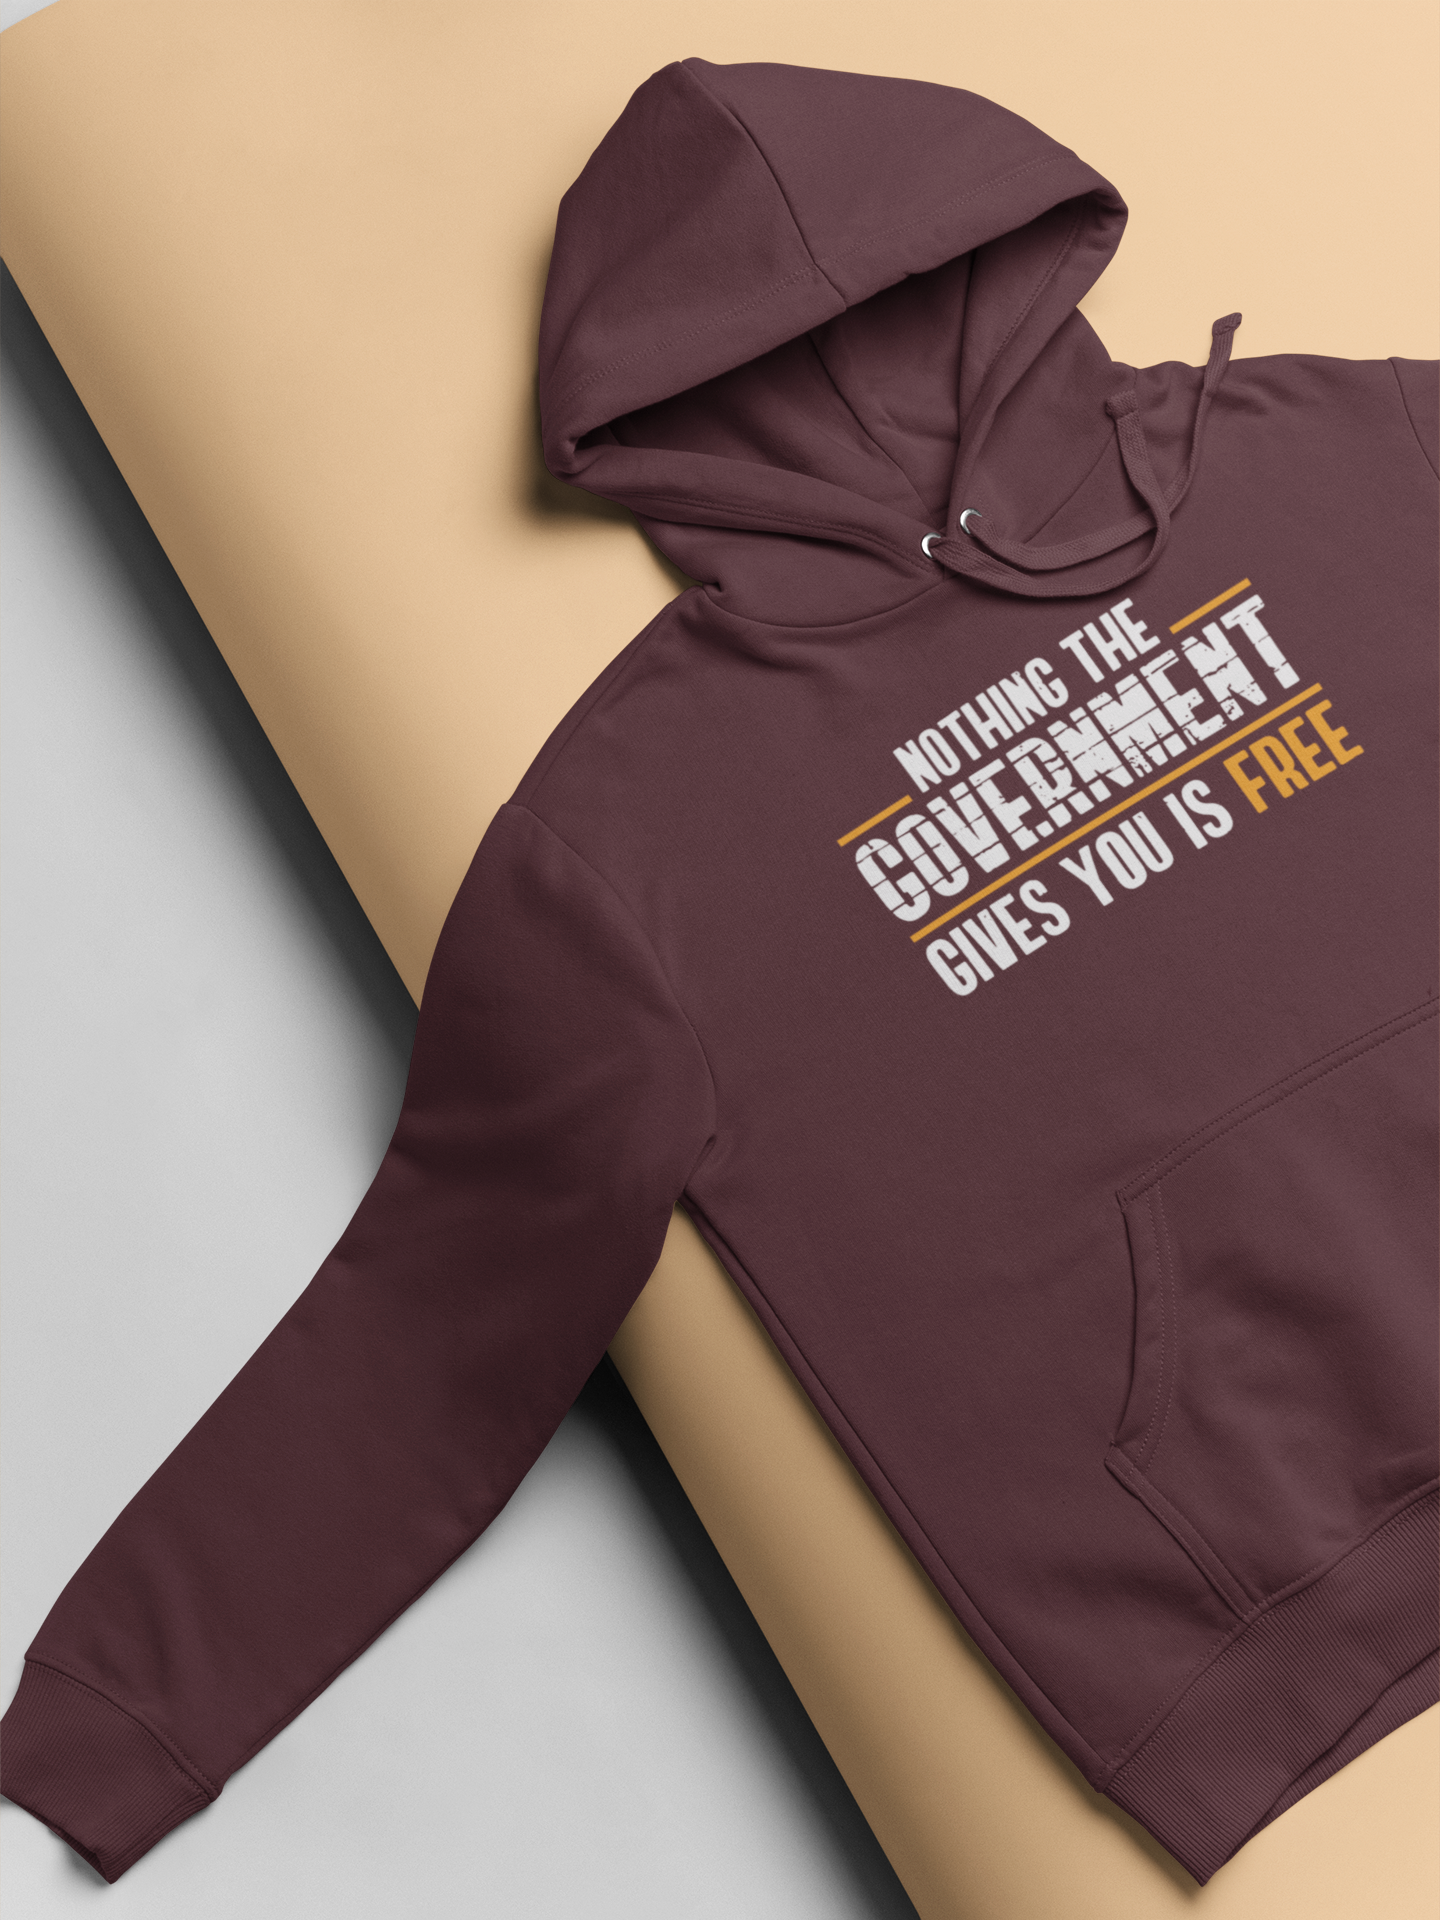 Nothing The Government Gives You Is Free Anti Government Hoodies for Women-FunkyTeesClub